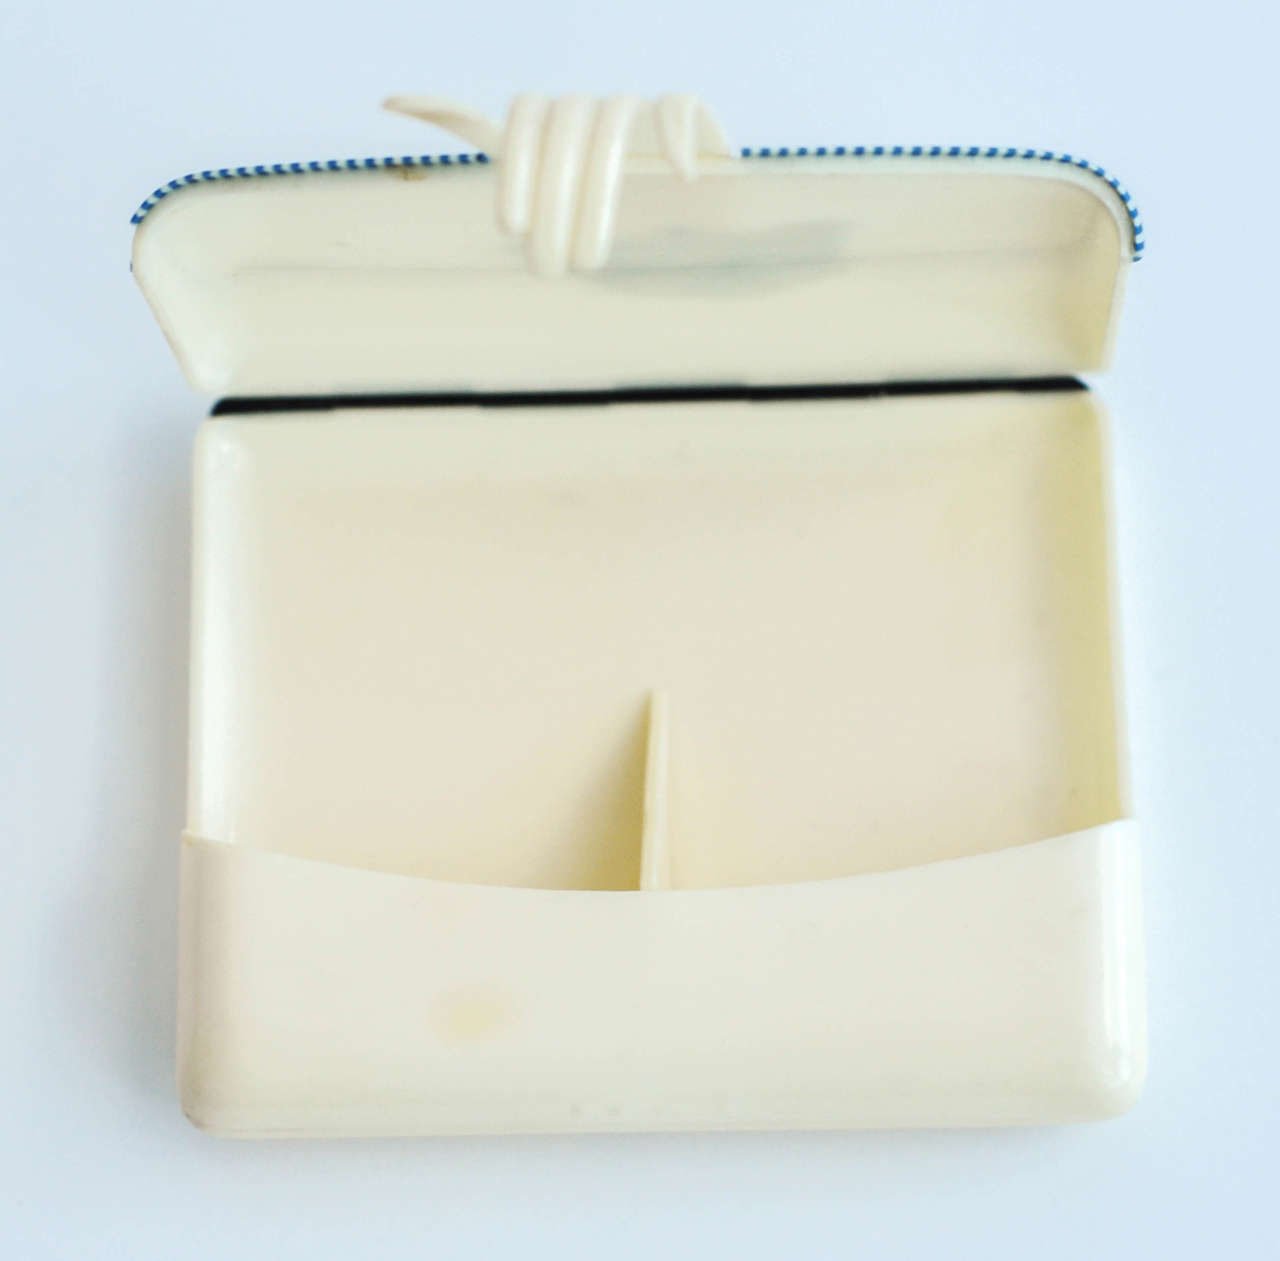 1920s Art Deco Celluloid Hand Case For Sale at 1stdibs